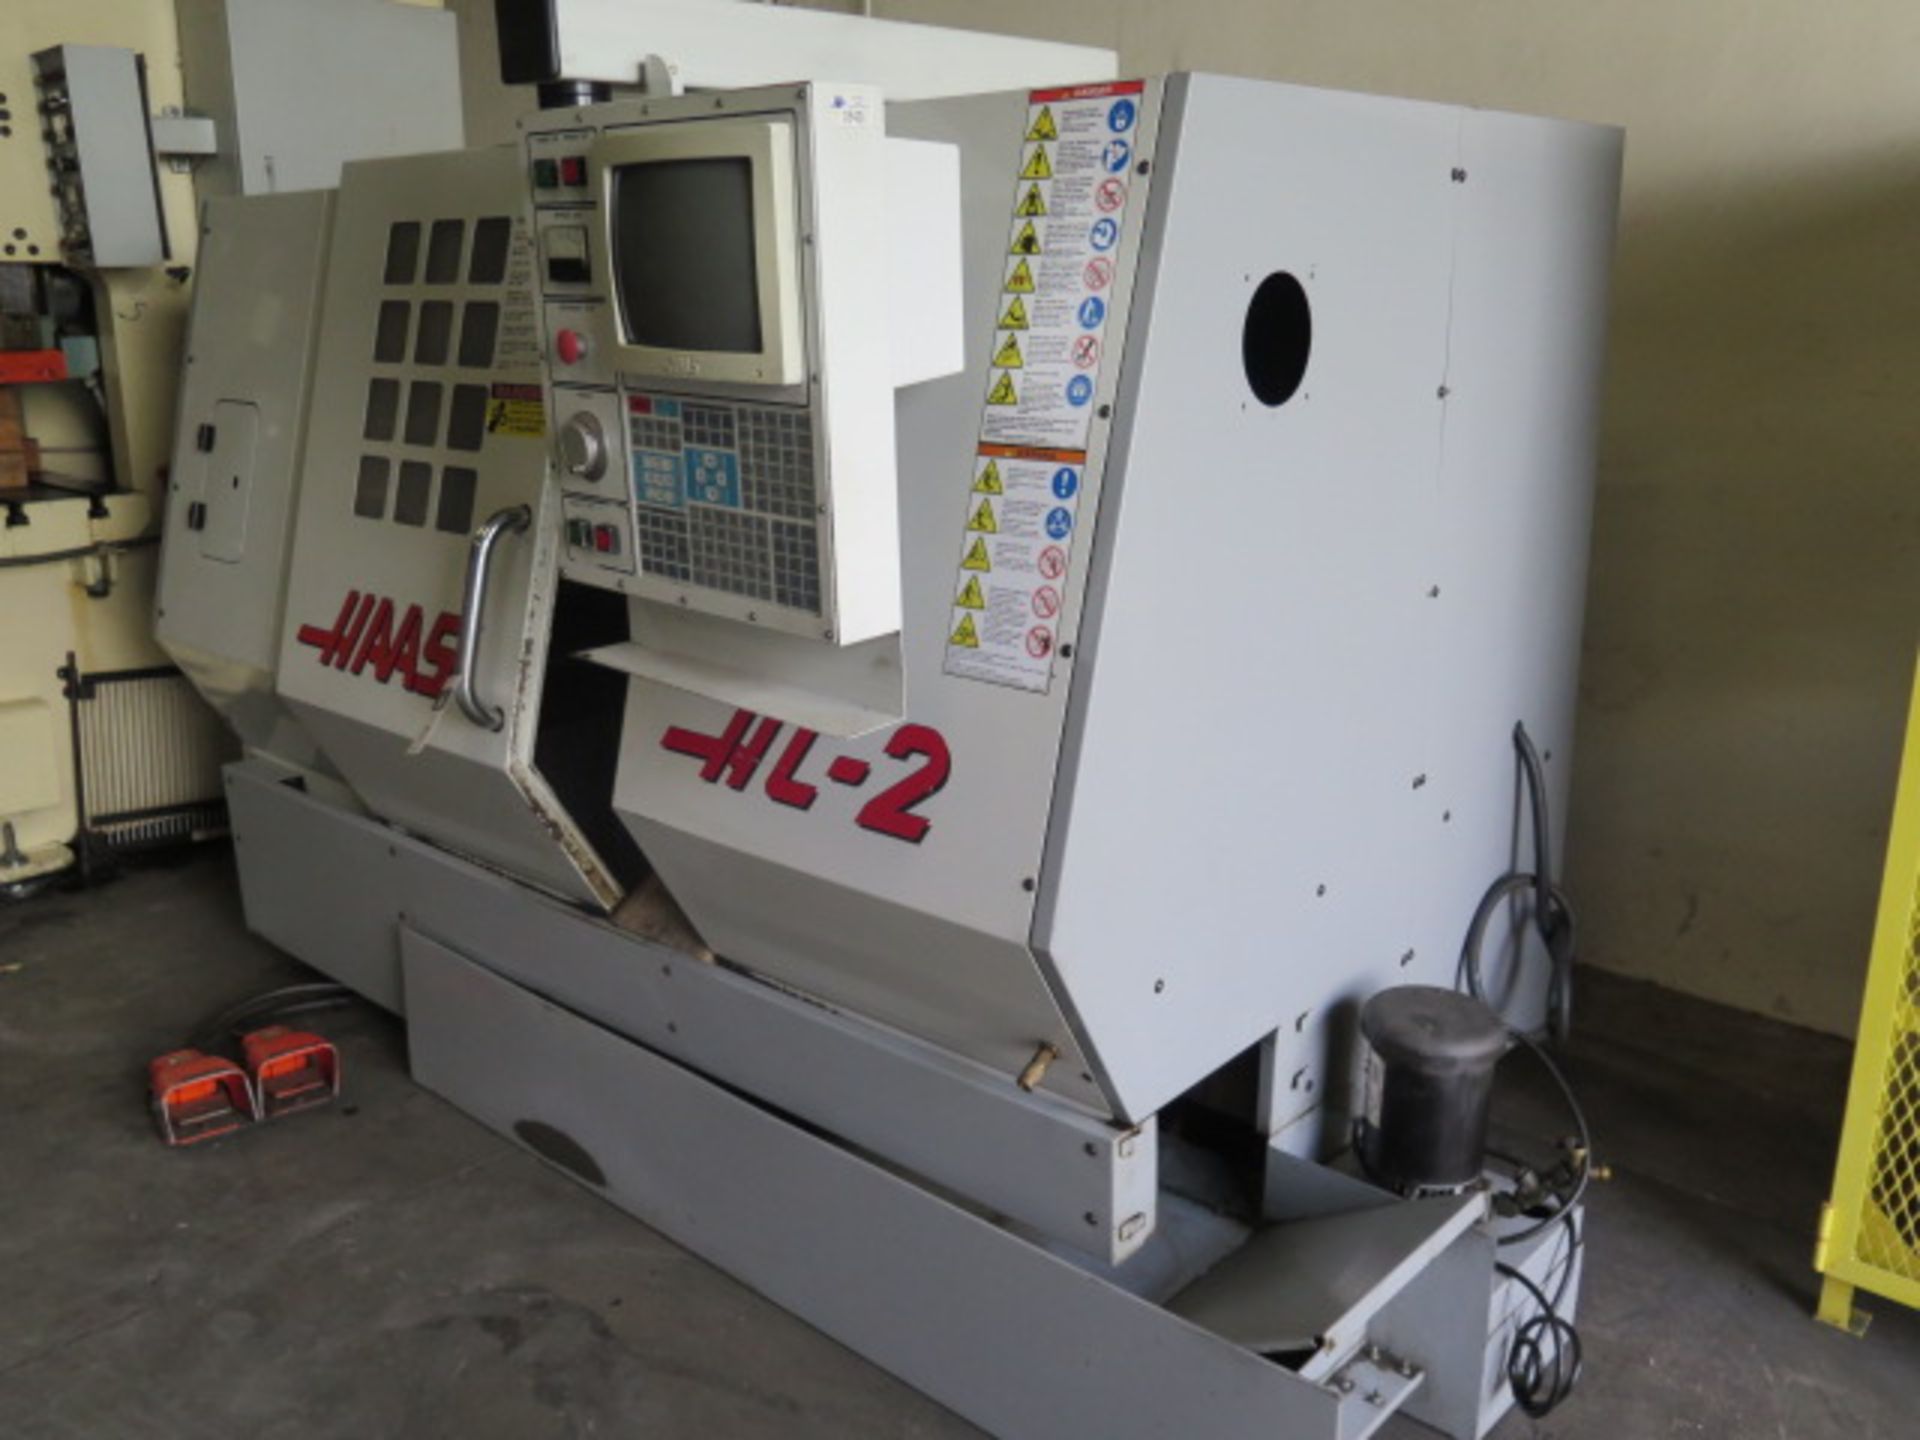 1997 Haas HL-2 CNC Turning Center s/n 60729, 10-Station Turret, Tailstock, 3750 RPM, SOLD AS IS - Image 2 of 14